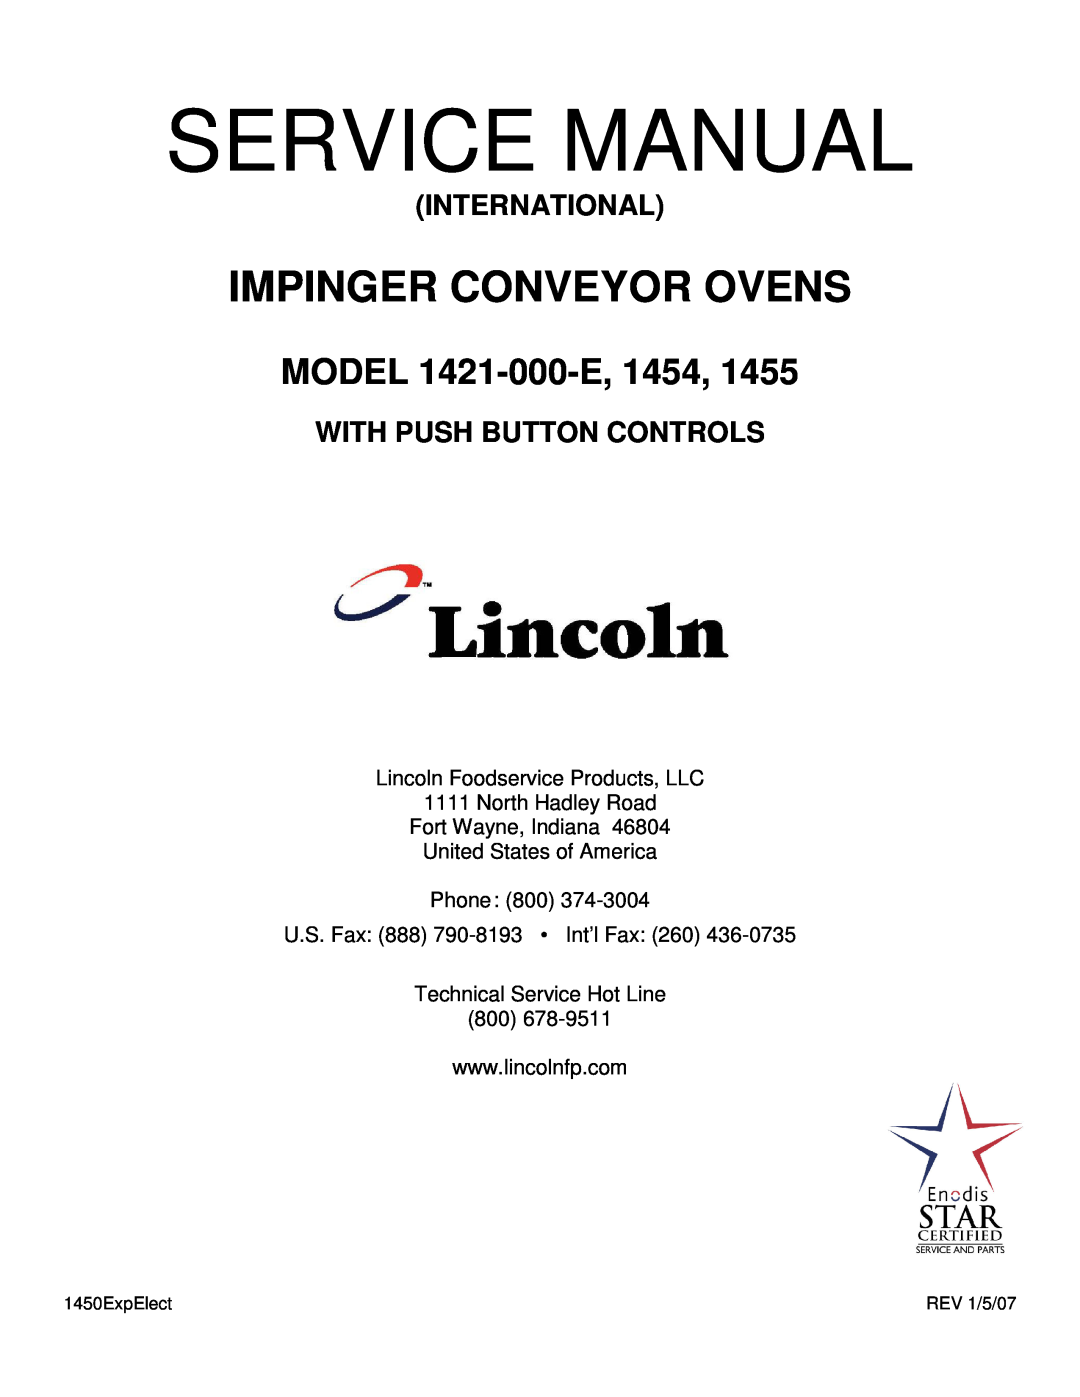 Lincoln 1454-000-E service manual Lincoln Foodservice Products, LLC, North Hadley Road Fort Wayne, Indiana, Service Manual 